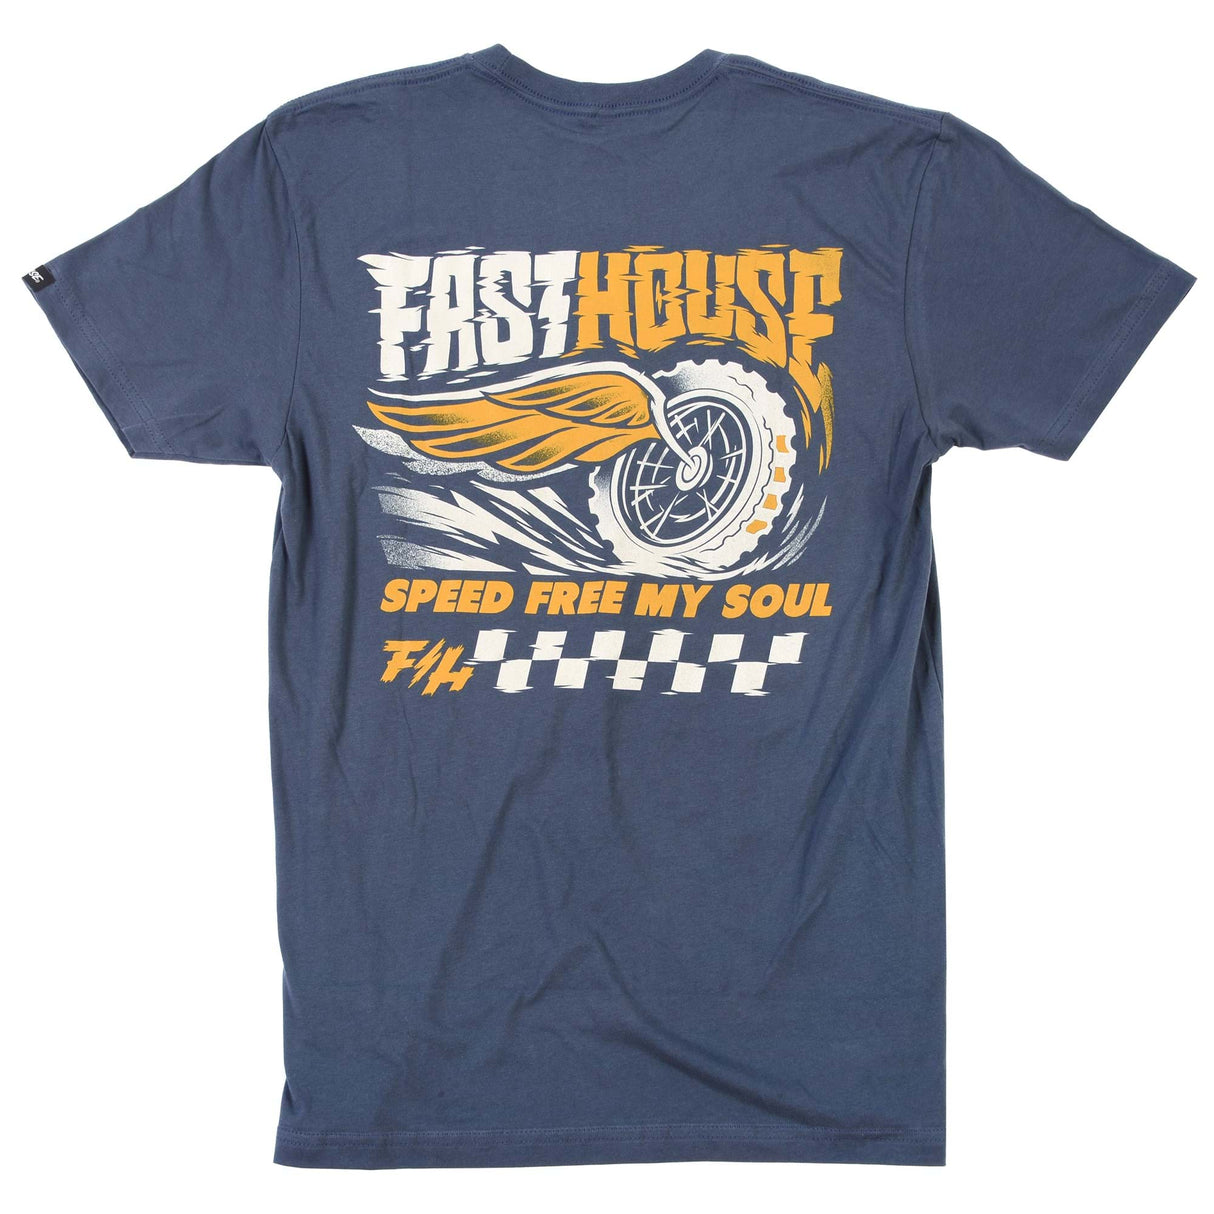 Fasthouse High Roller Tee